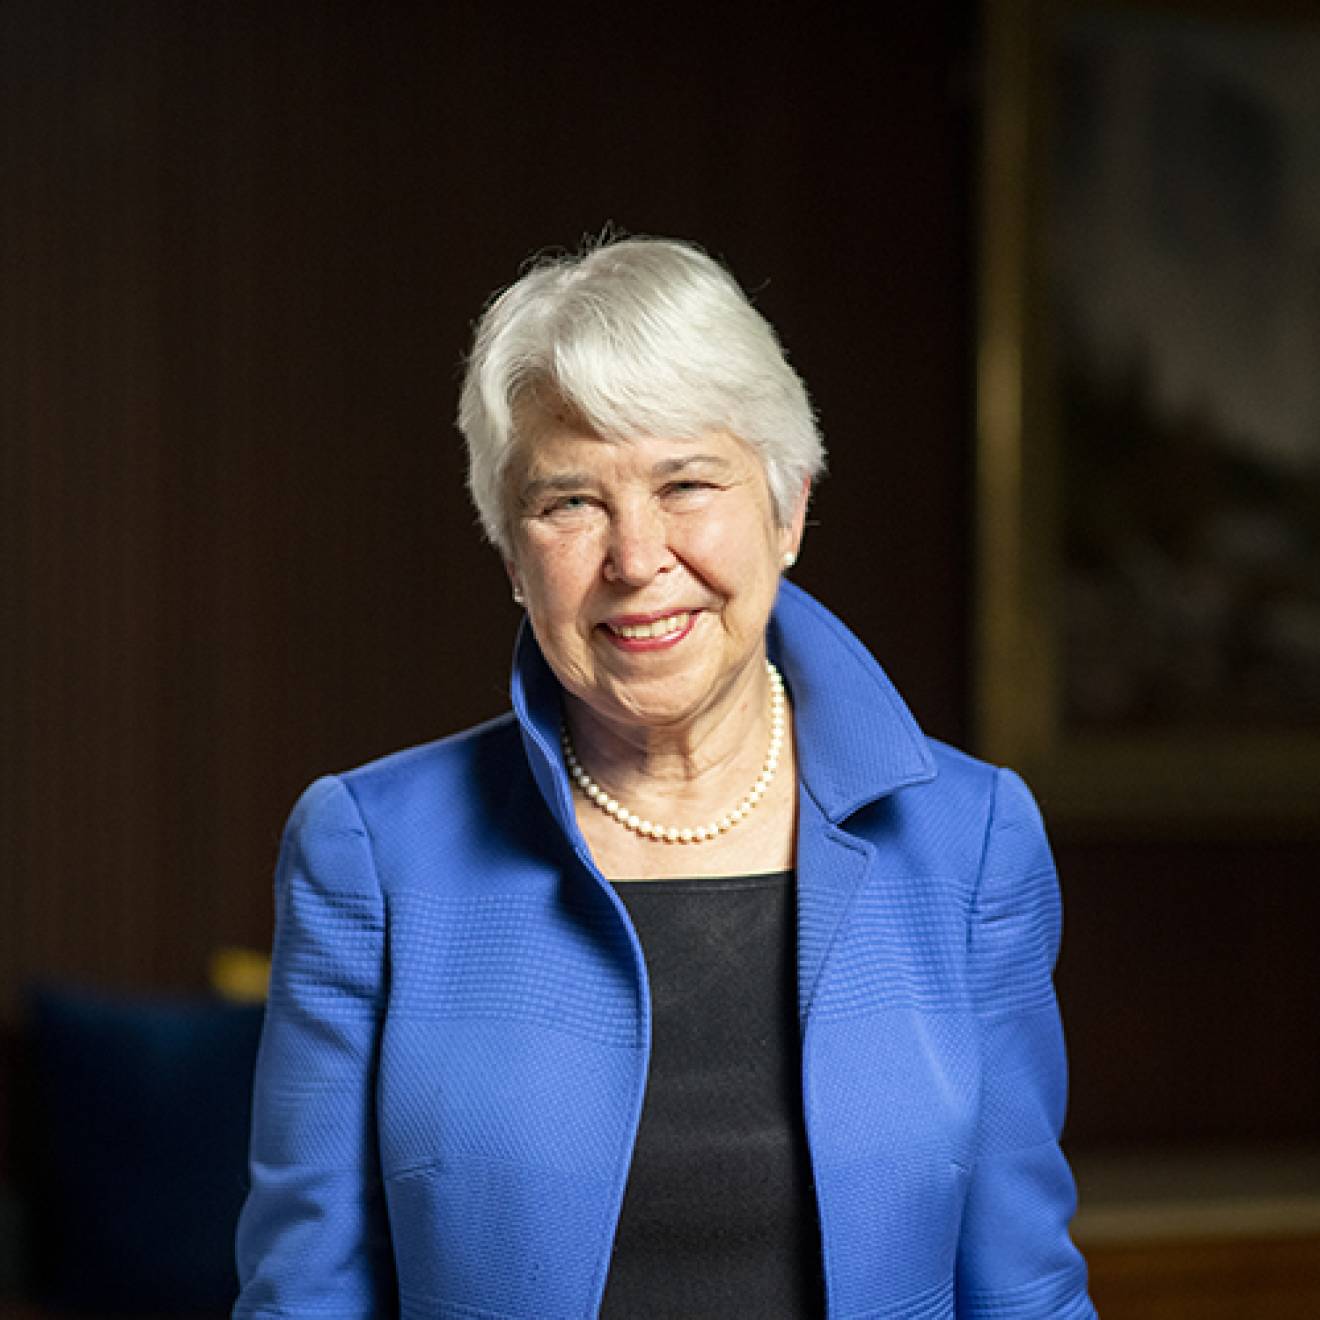 UC Berkeley Chancellor Carol Christ, smiling woman with short white hair, in blue jacket